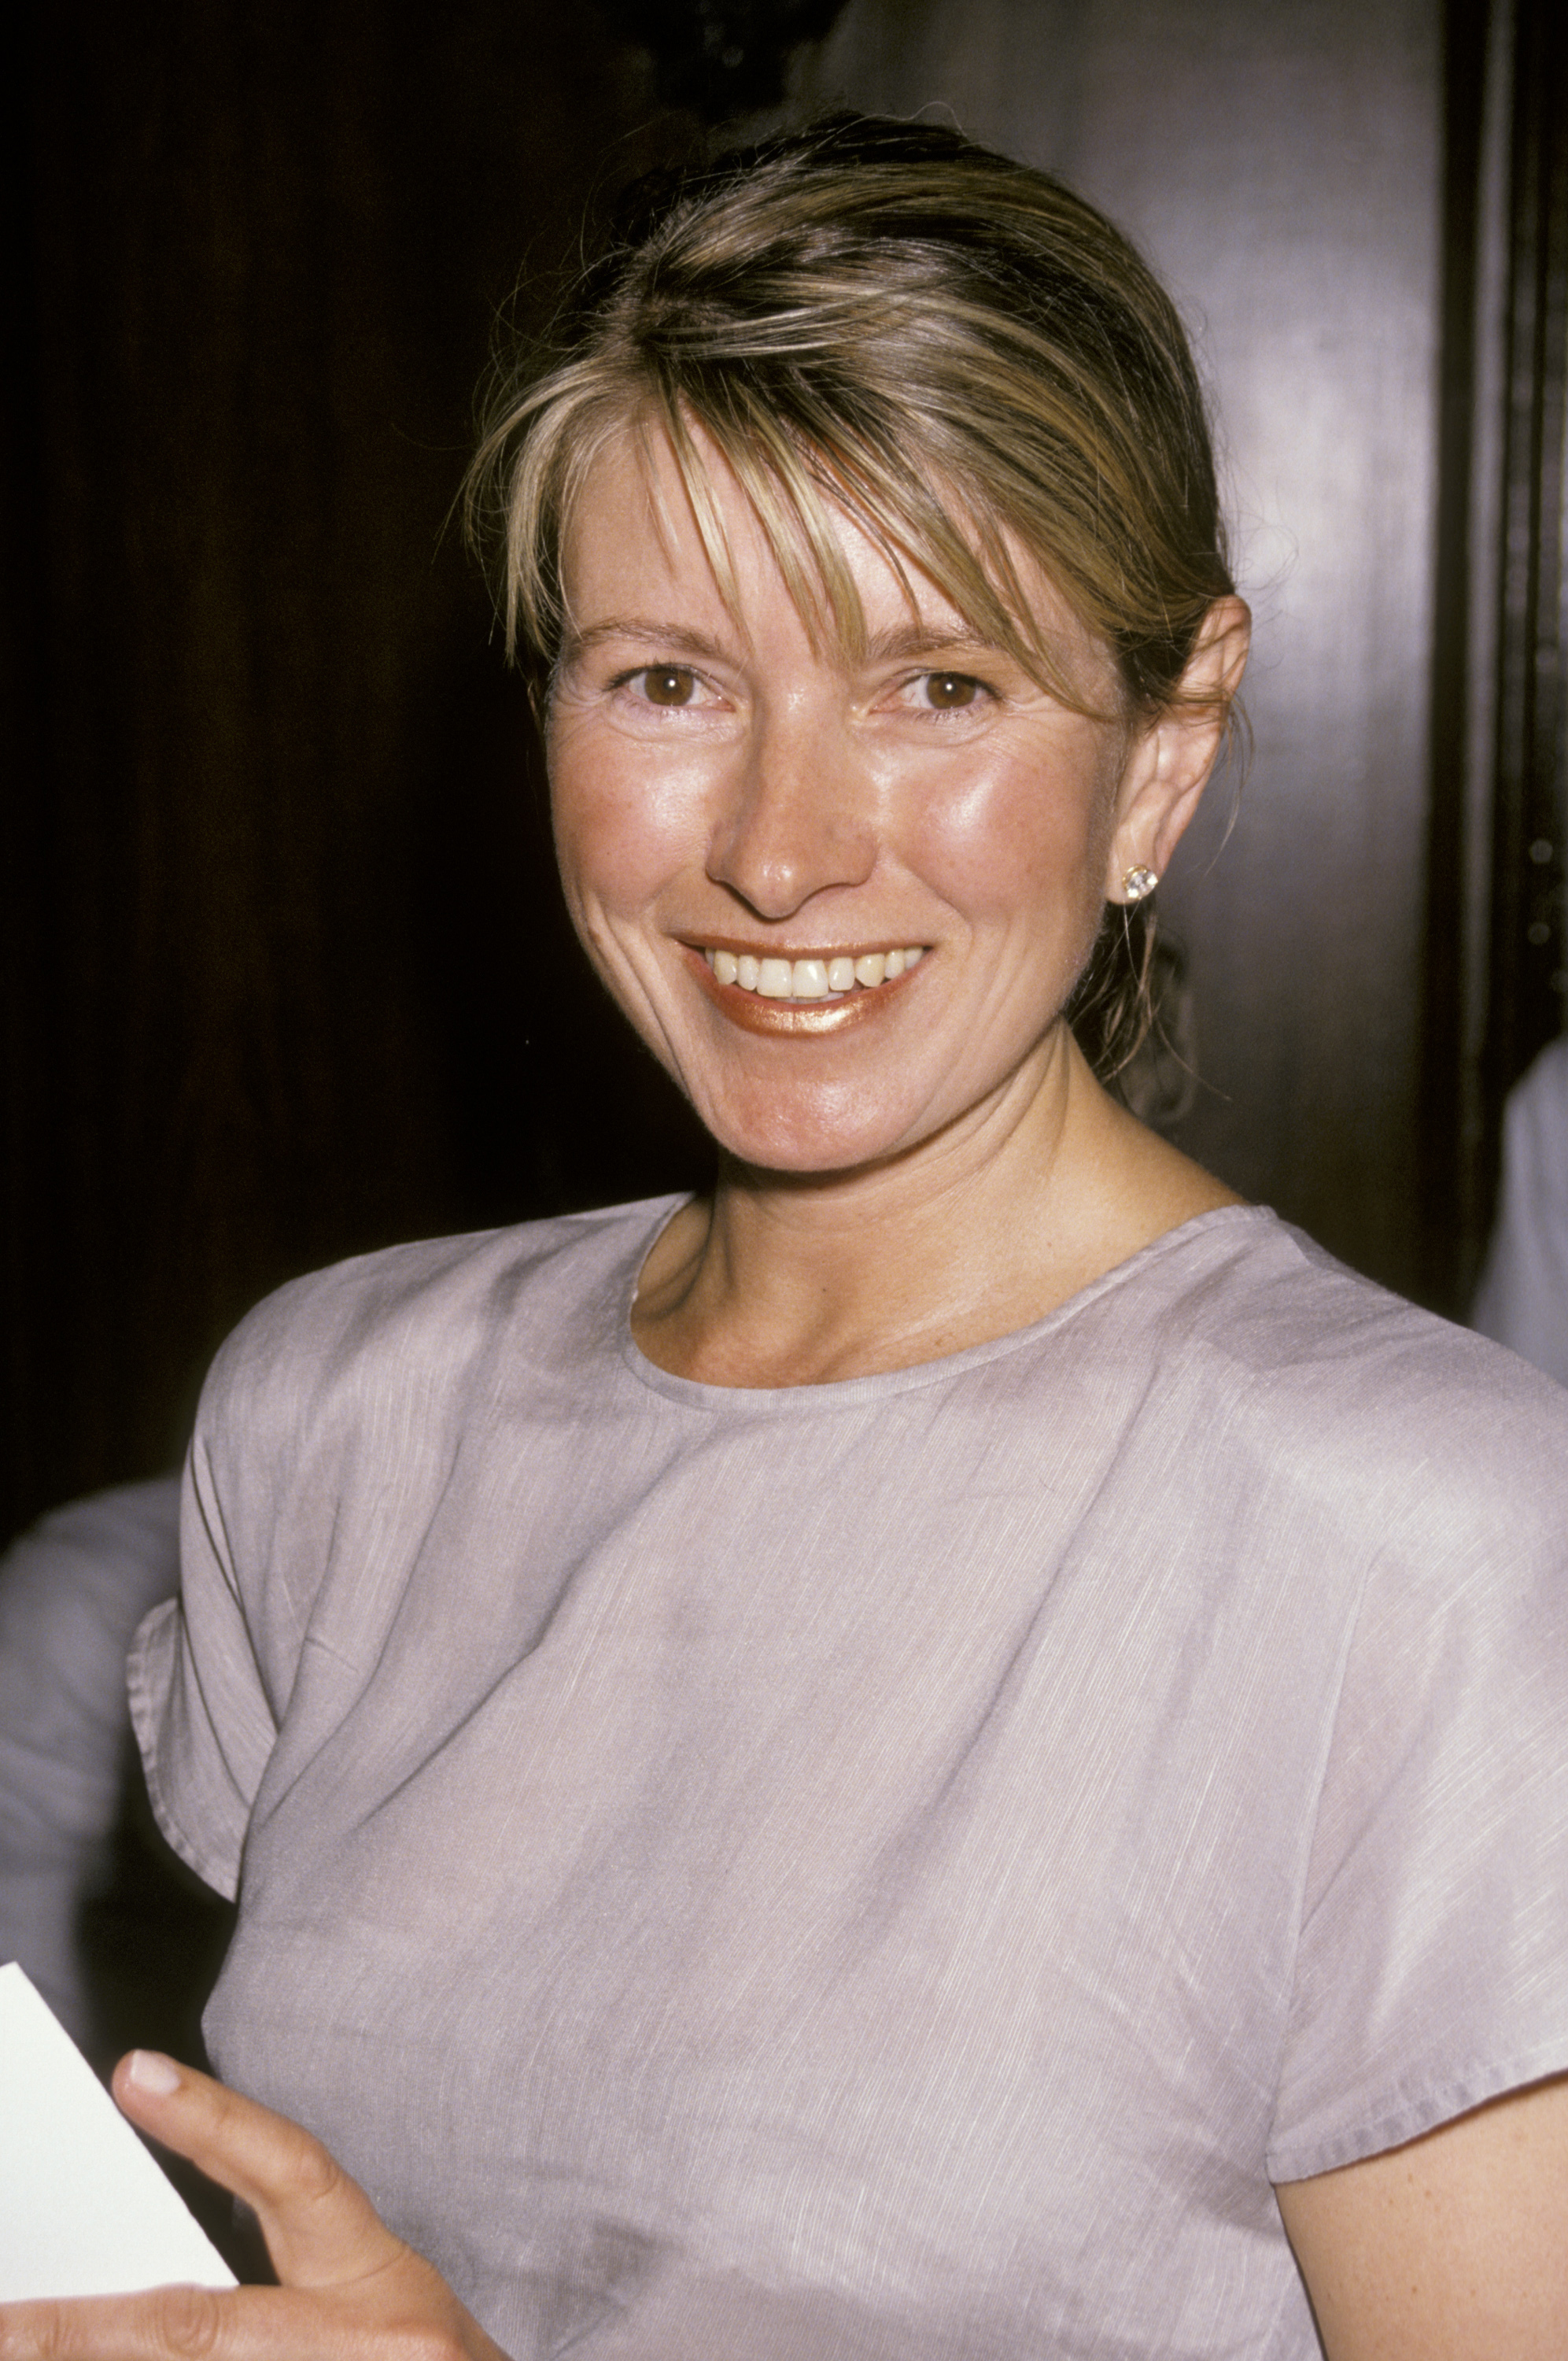 Martha Stewart at the "Let Them Eat Cake" competition in New York | Source: Getty Images